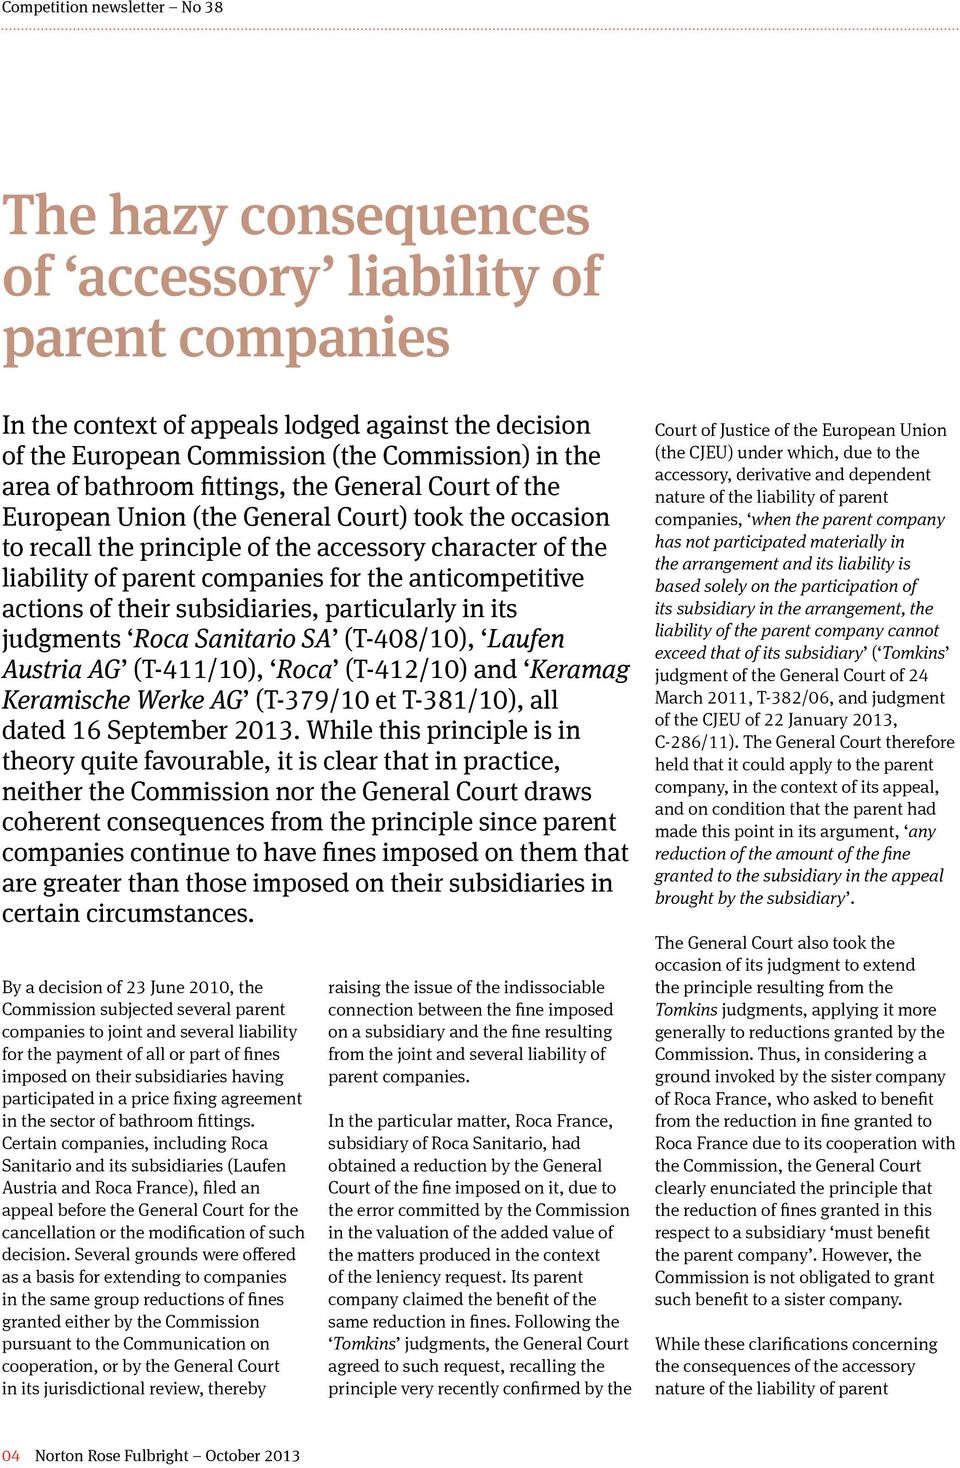 the anticompetitive actions of their subsidiaries, particularly in its judgments Roca Sanitario SA (T-408/10), Laufen Austria AG (T-411/10), Roca (T-412/10) and Keramag Keramische Werke AG (T-379/10